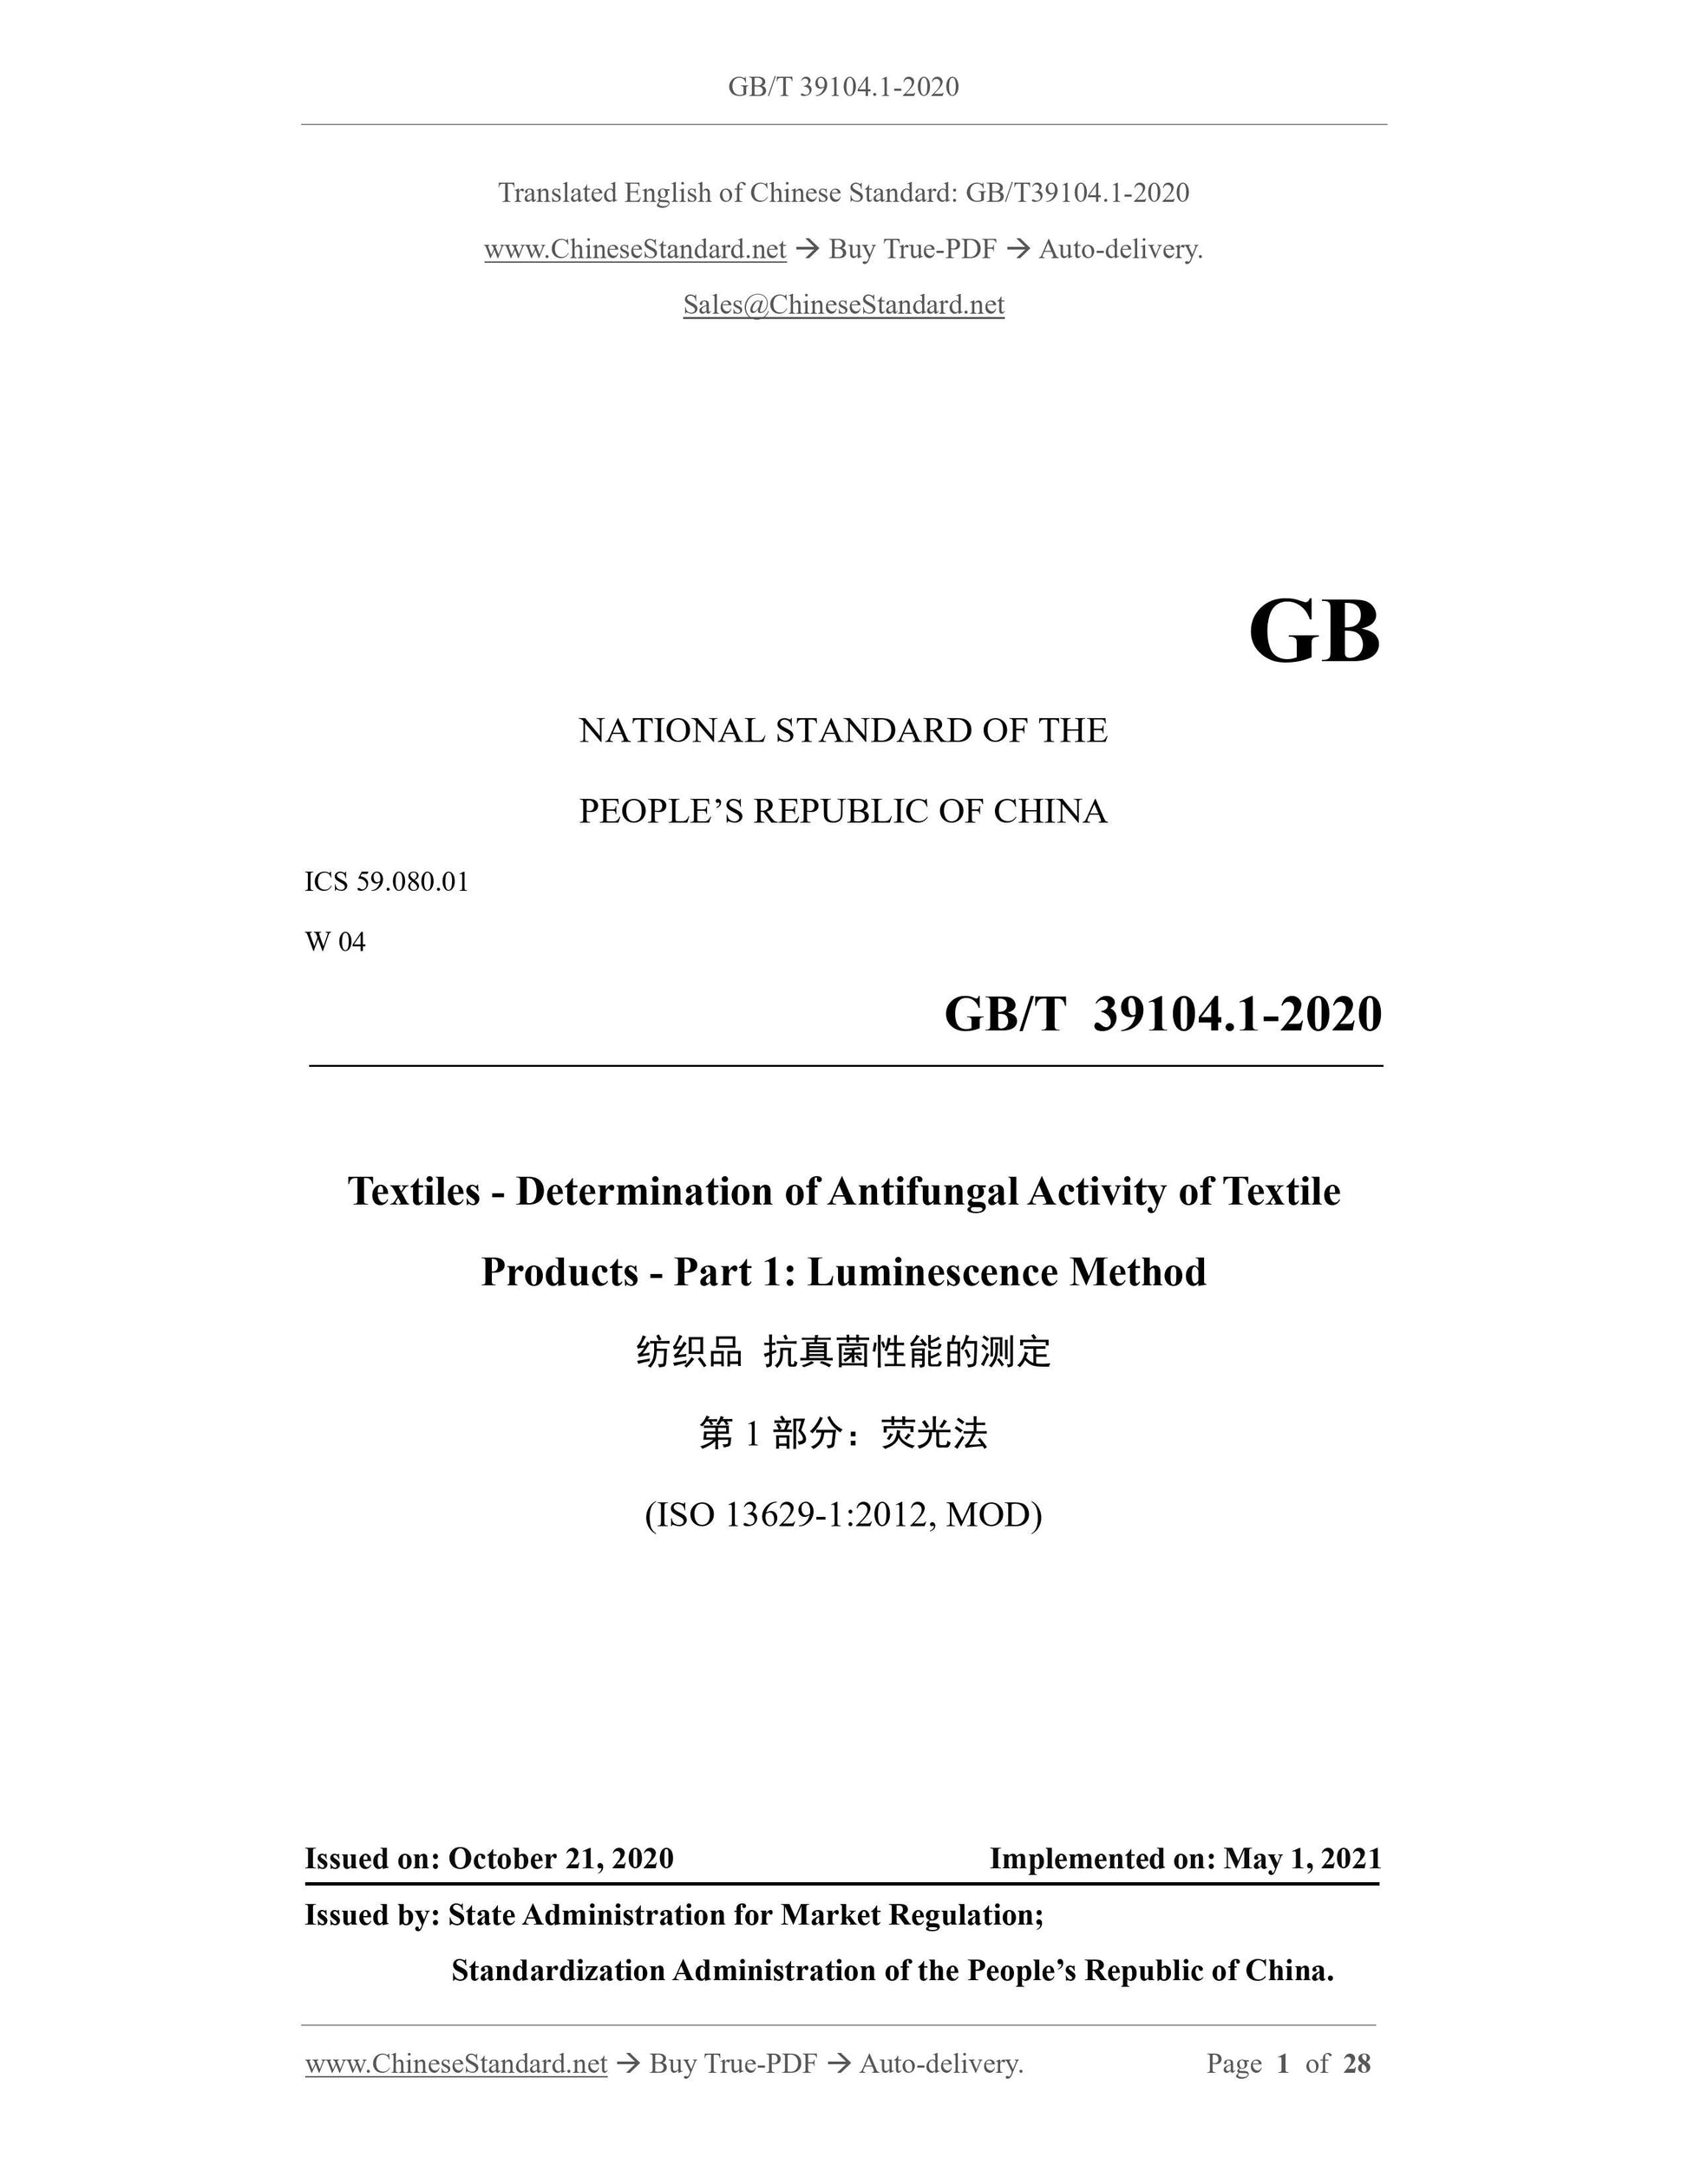 GB/T 39104.1-2020 Page 1